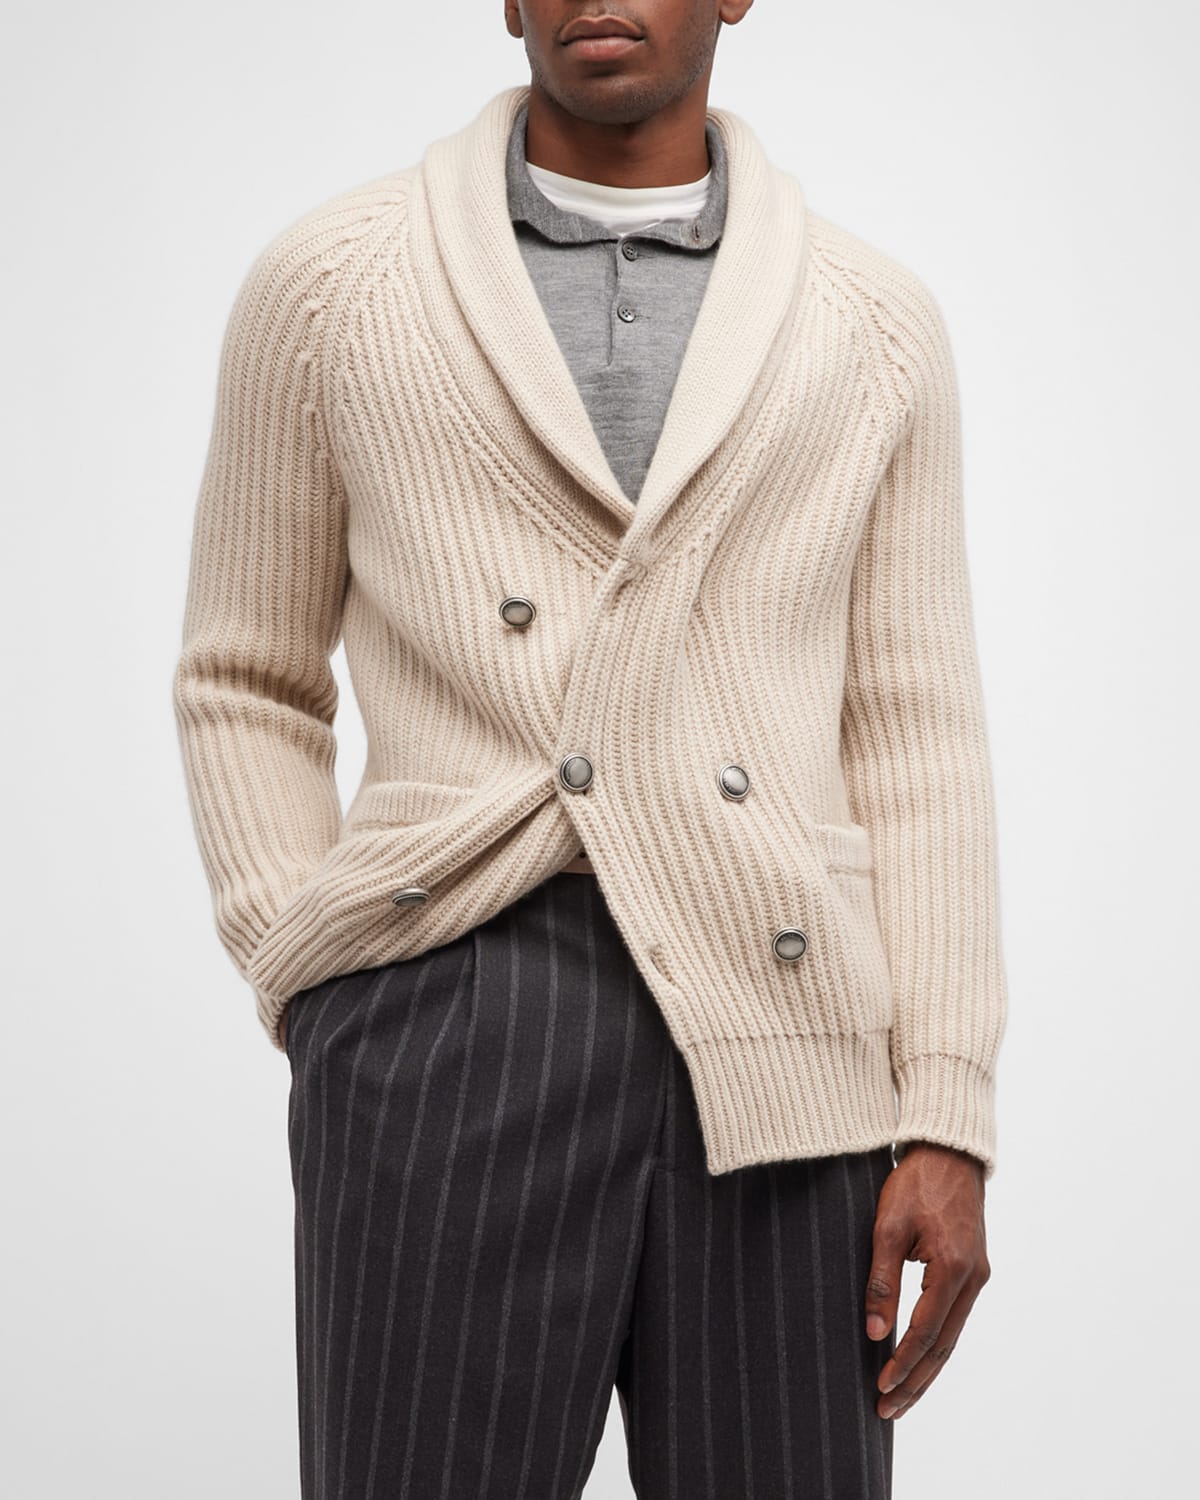 BRUNELLO CUCINELLI MEN'S HOLLYWOOD GLAMOUR CASHMERE DOUBLE-BREASTED CARDIGAN